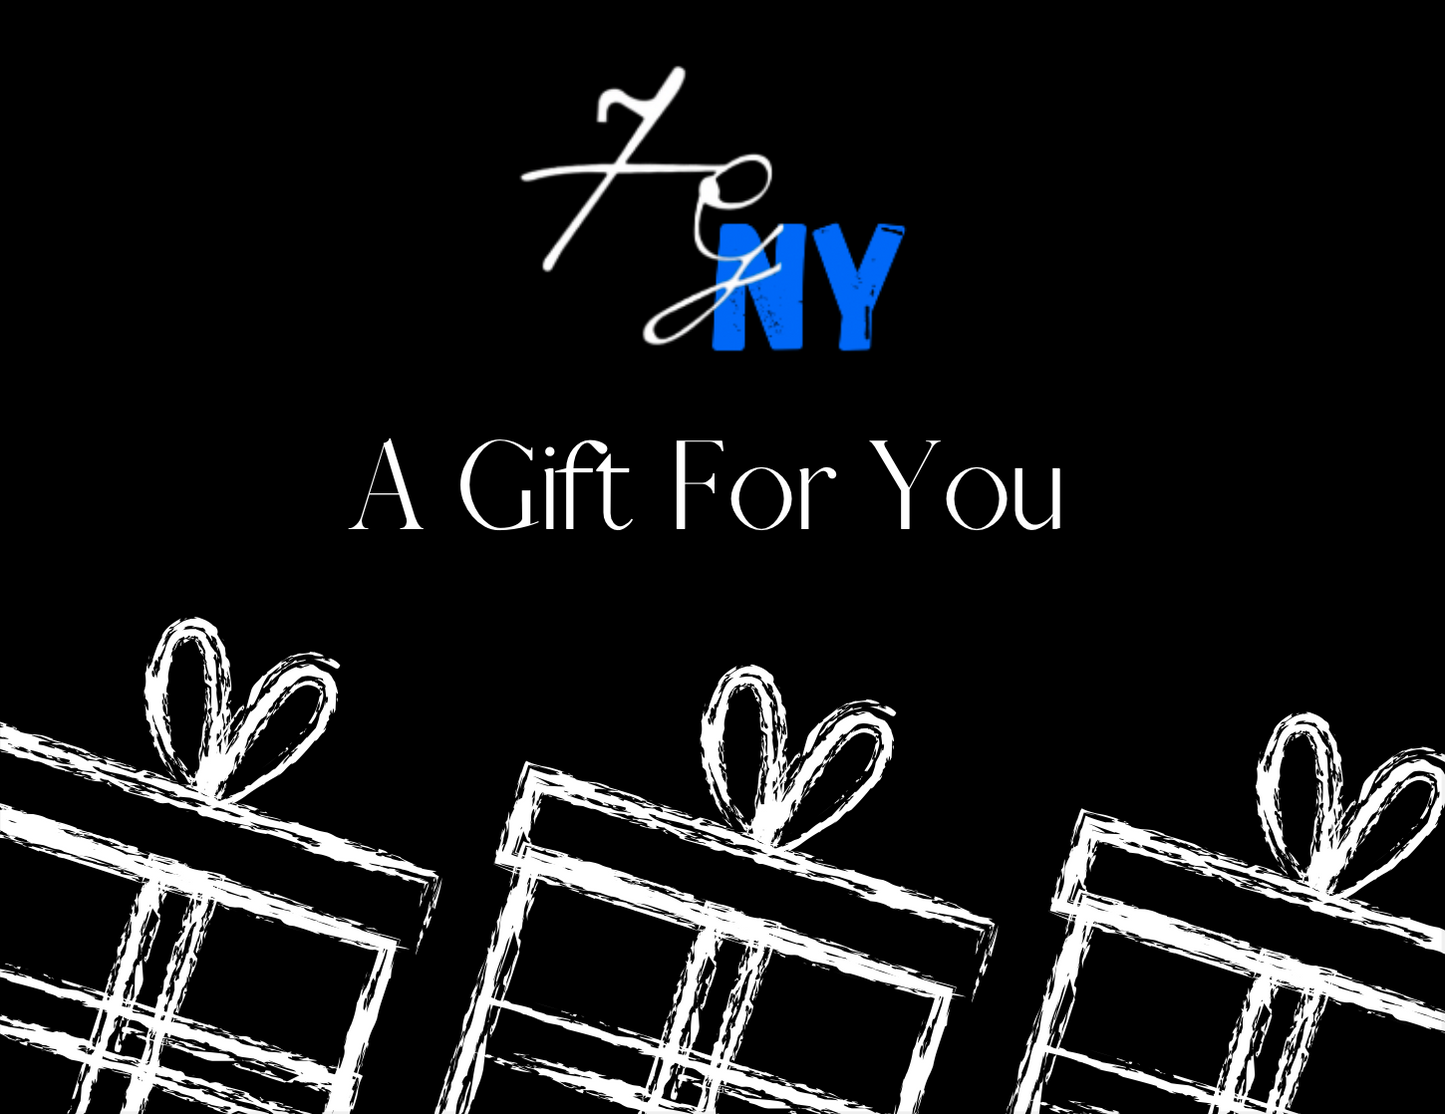 FGNY Gift Card